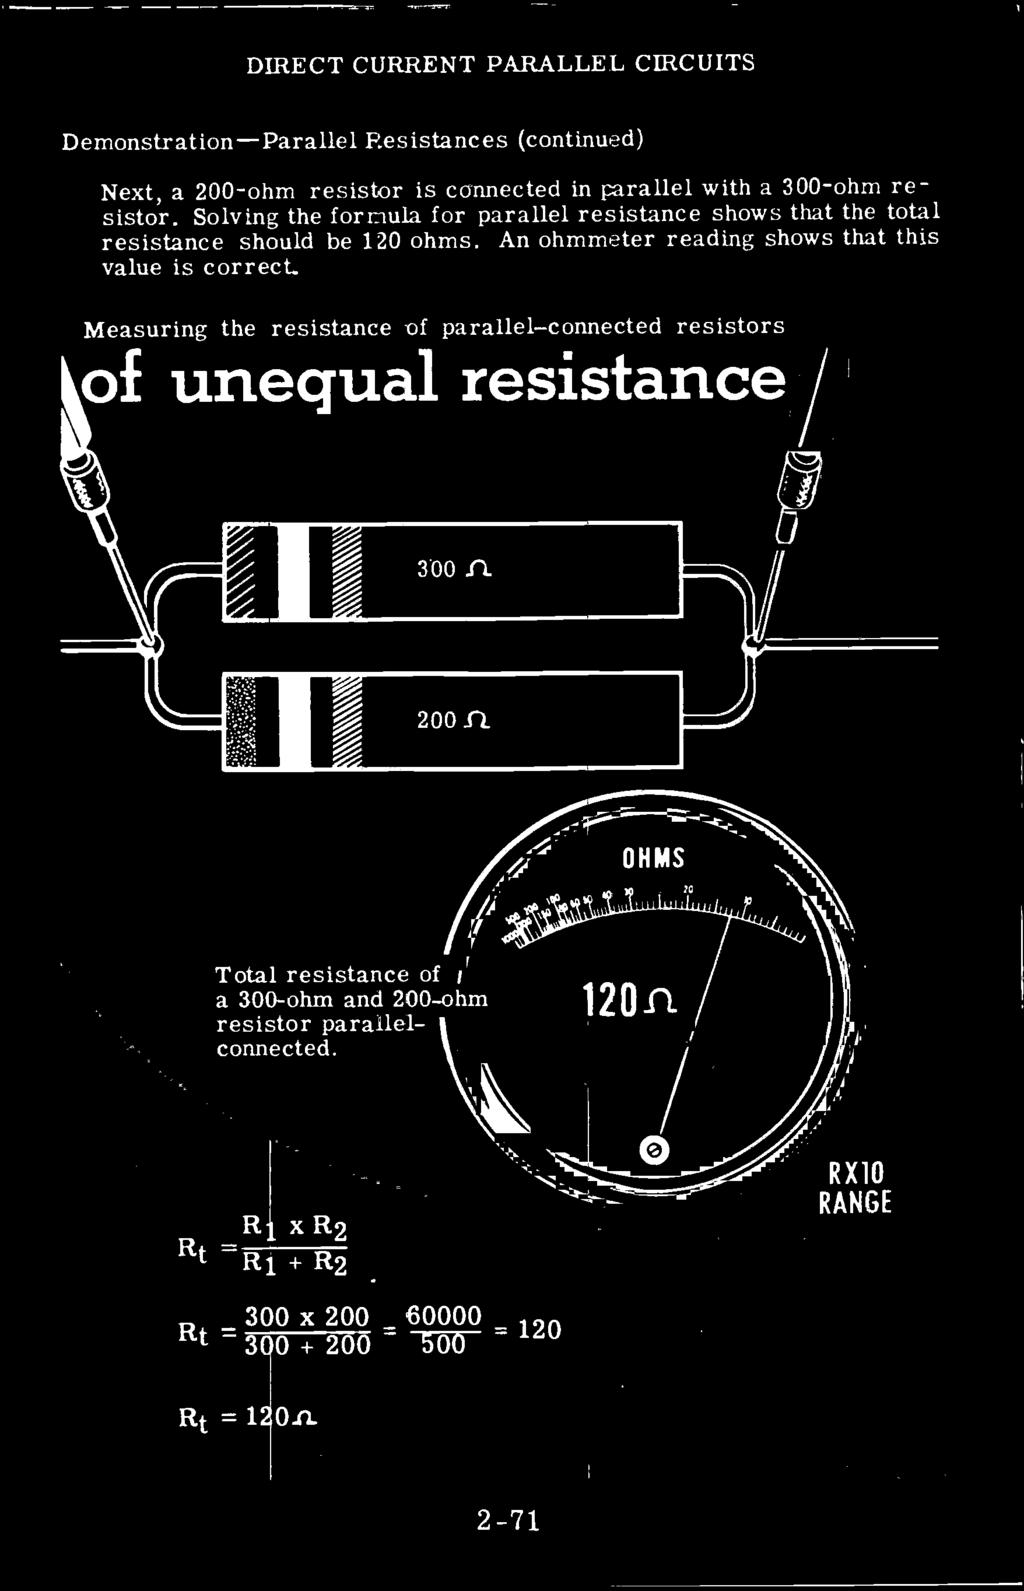 An ohmmeter reading shows that this value is correct` Measuring the resistance